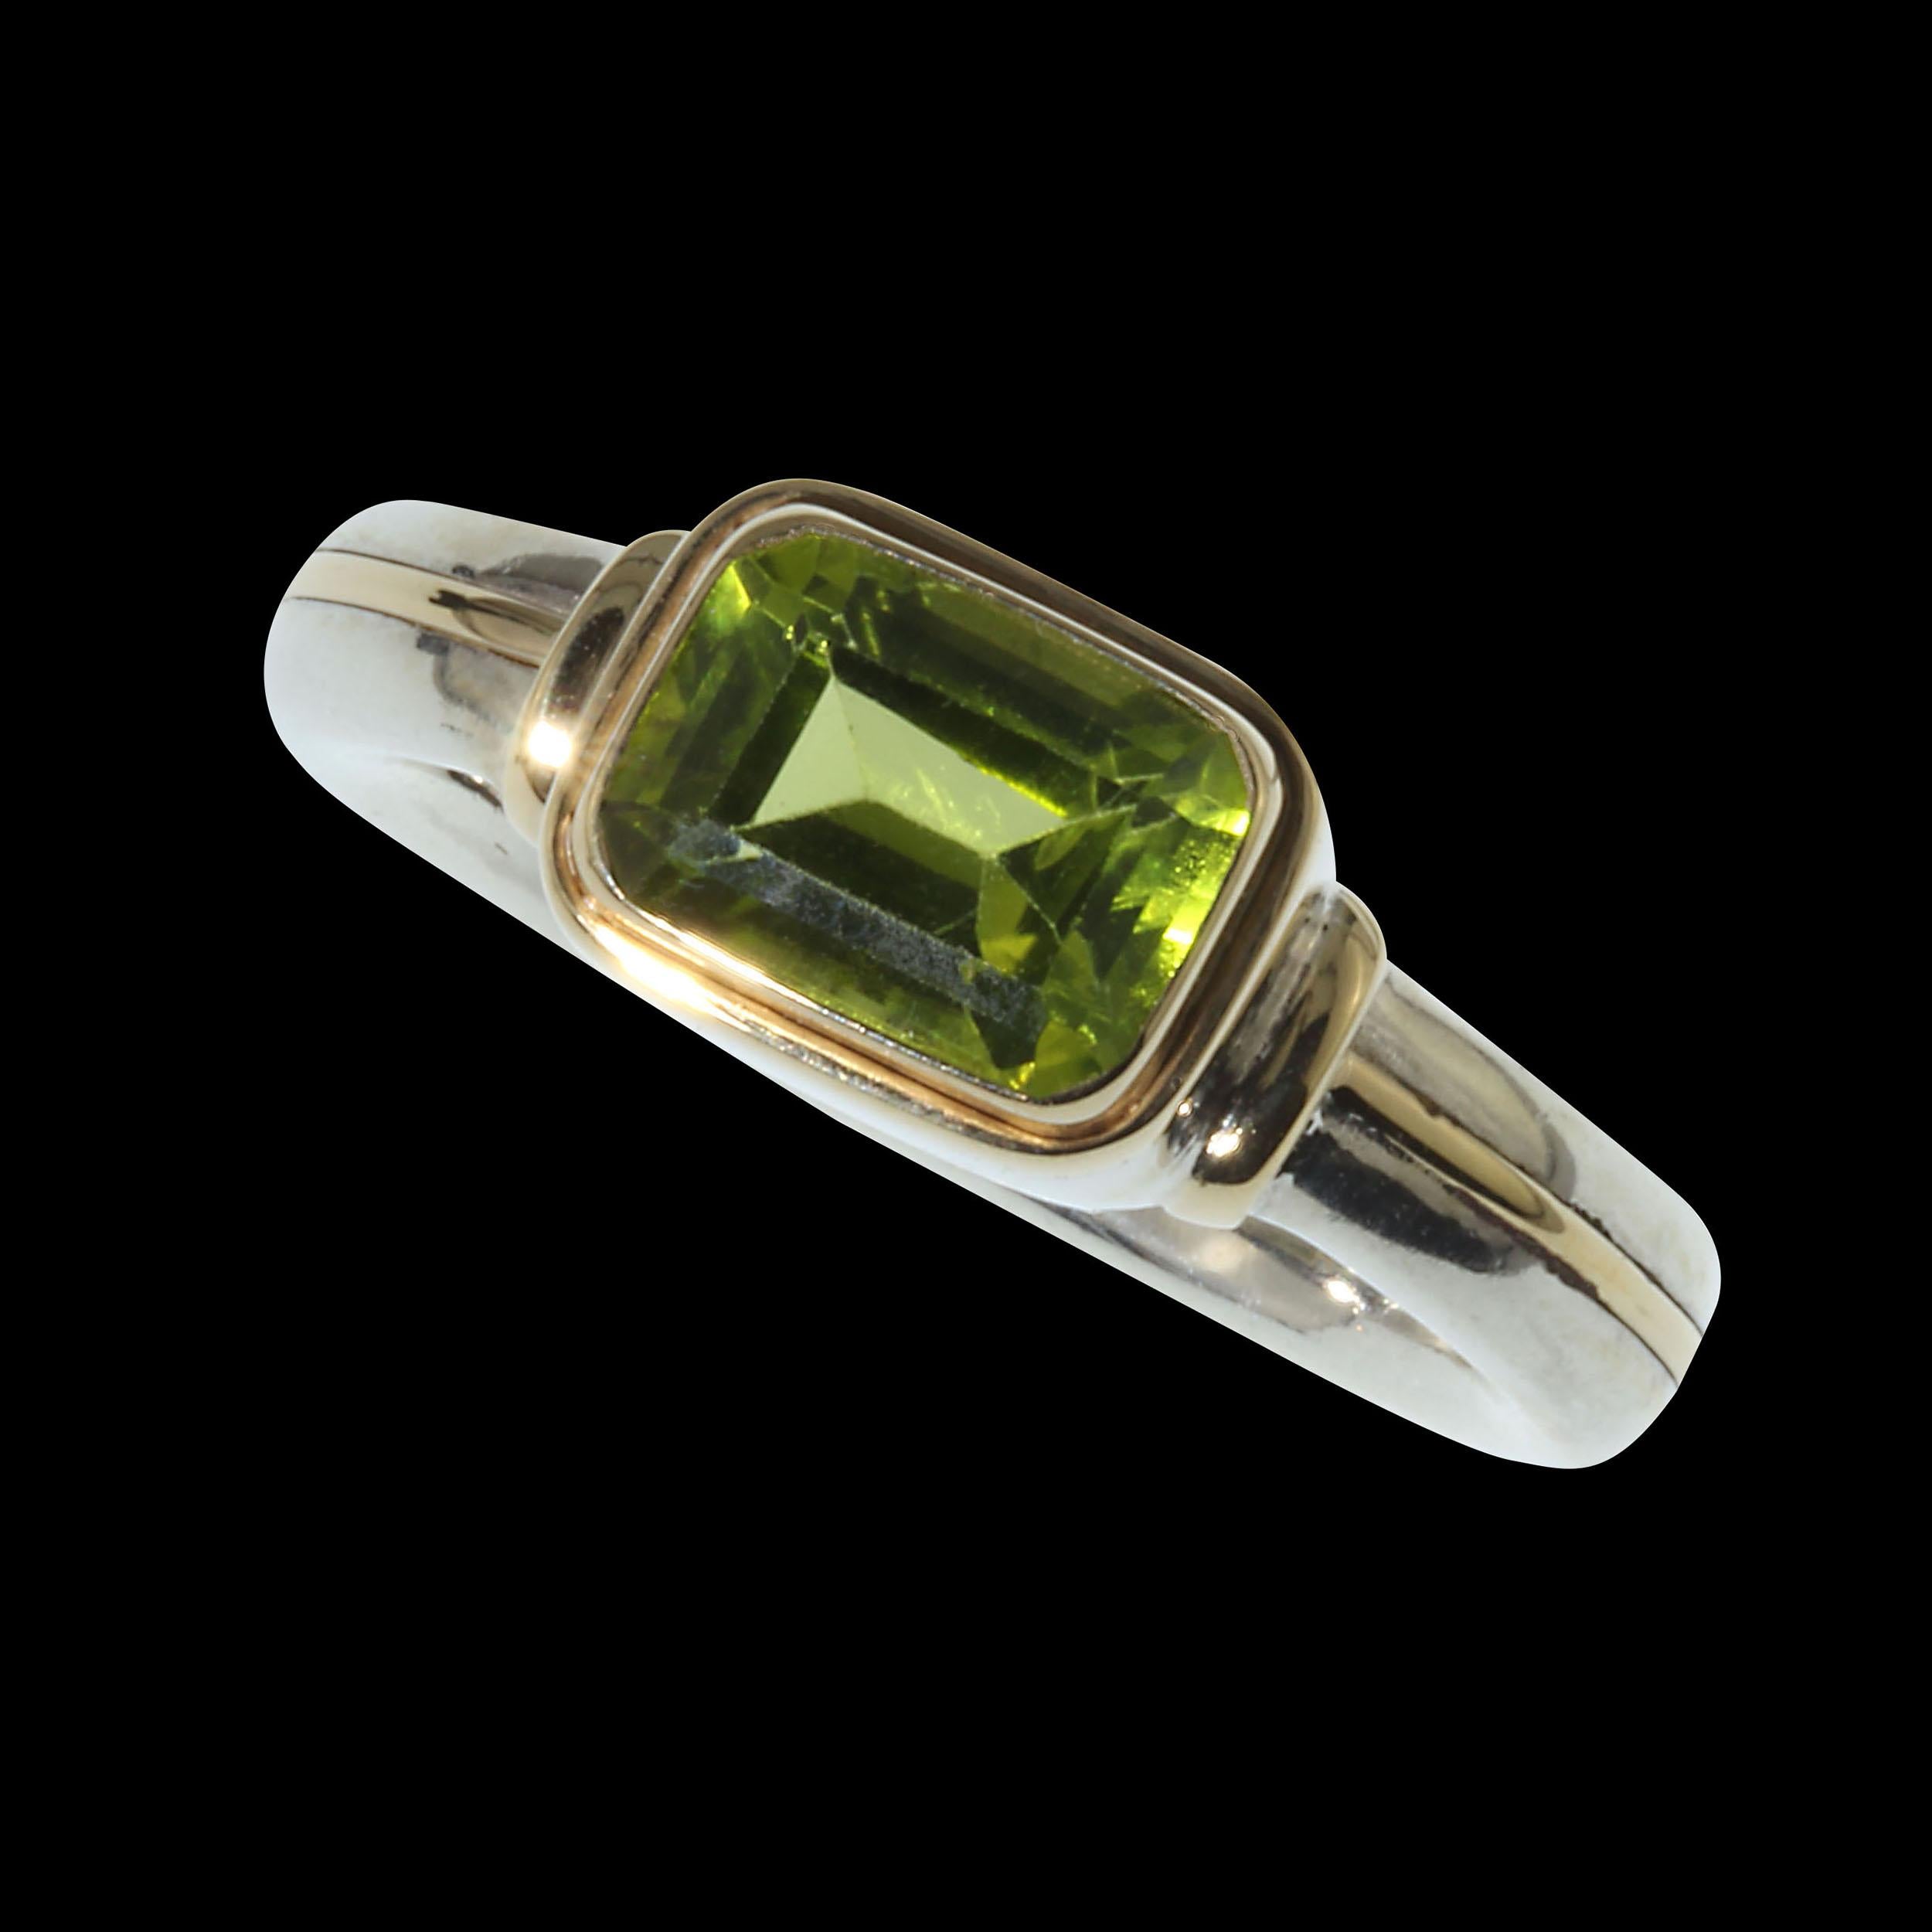 Emerald Cut Gemjunky Peridot and Sterling Silver Ring with 18 Karat Gold Accents